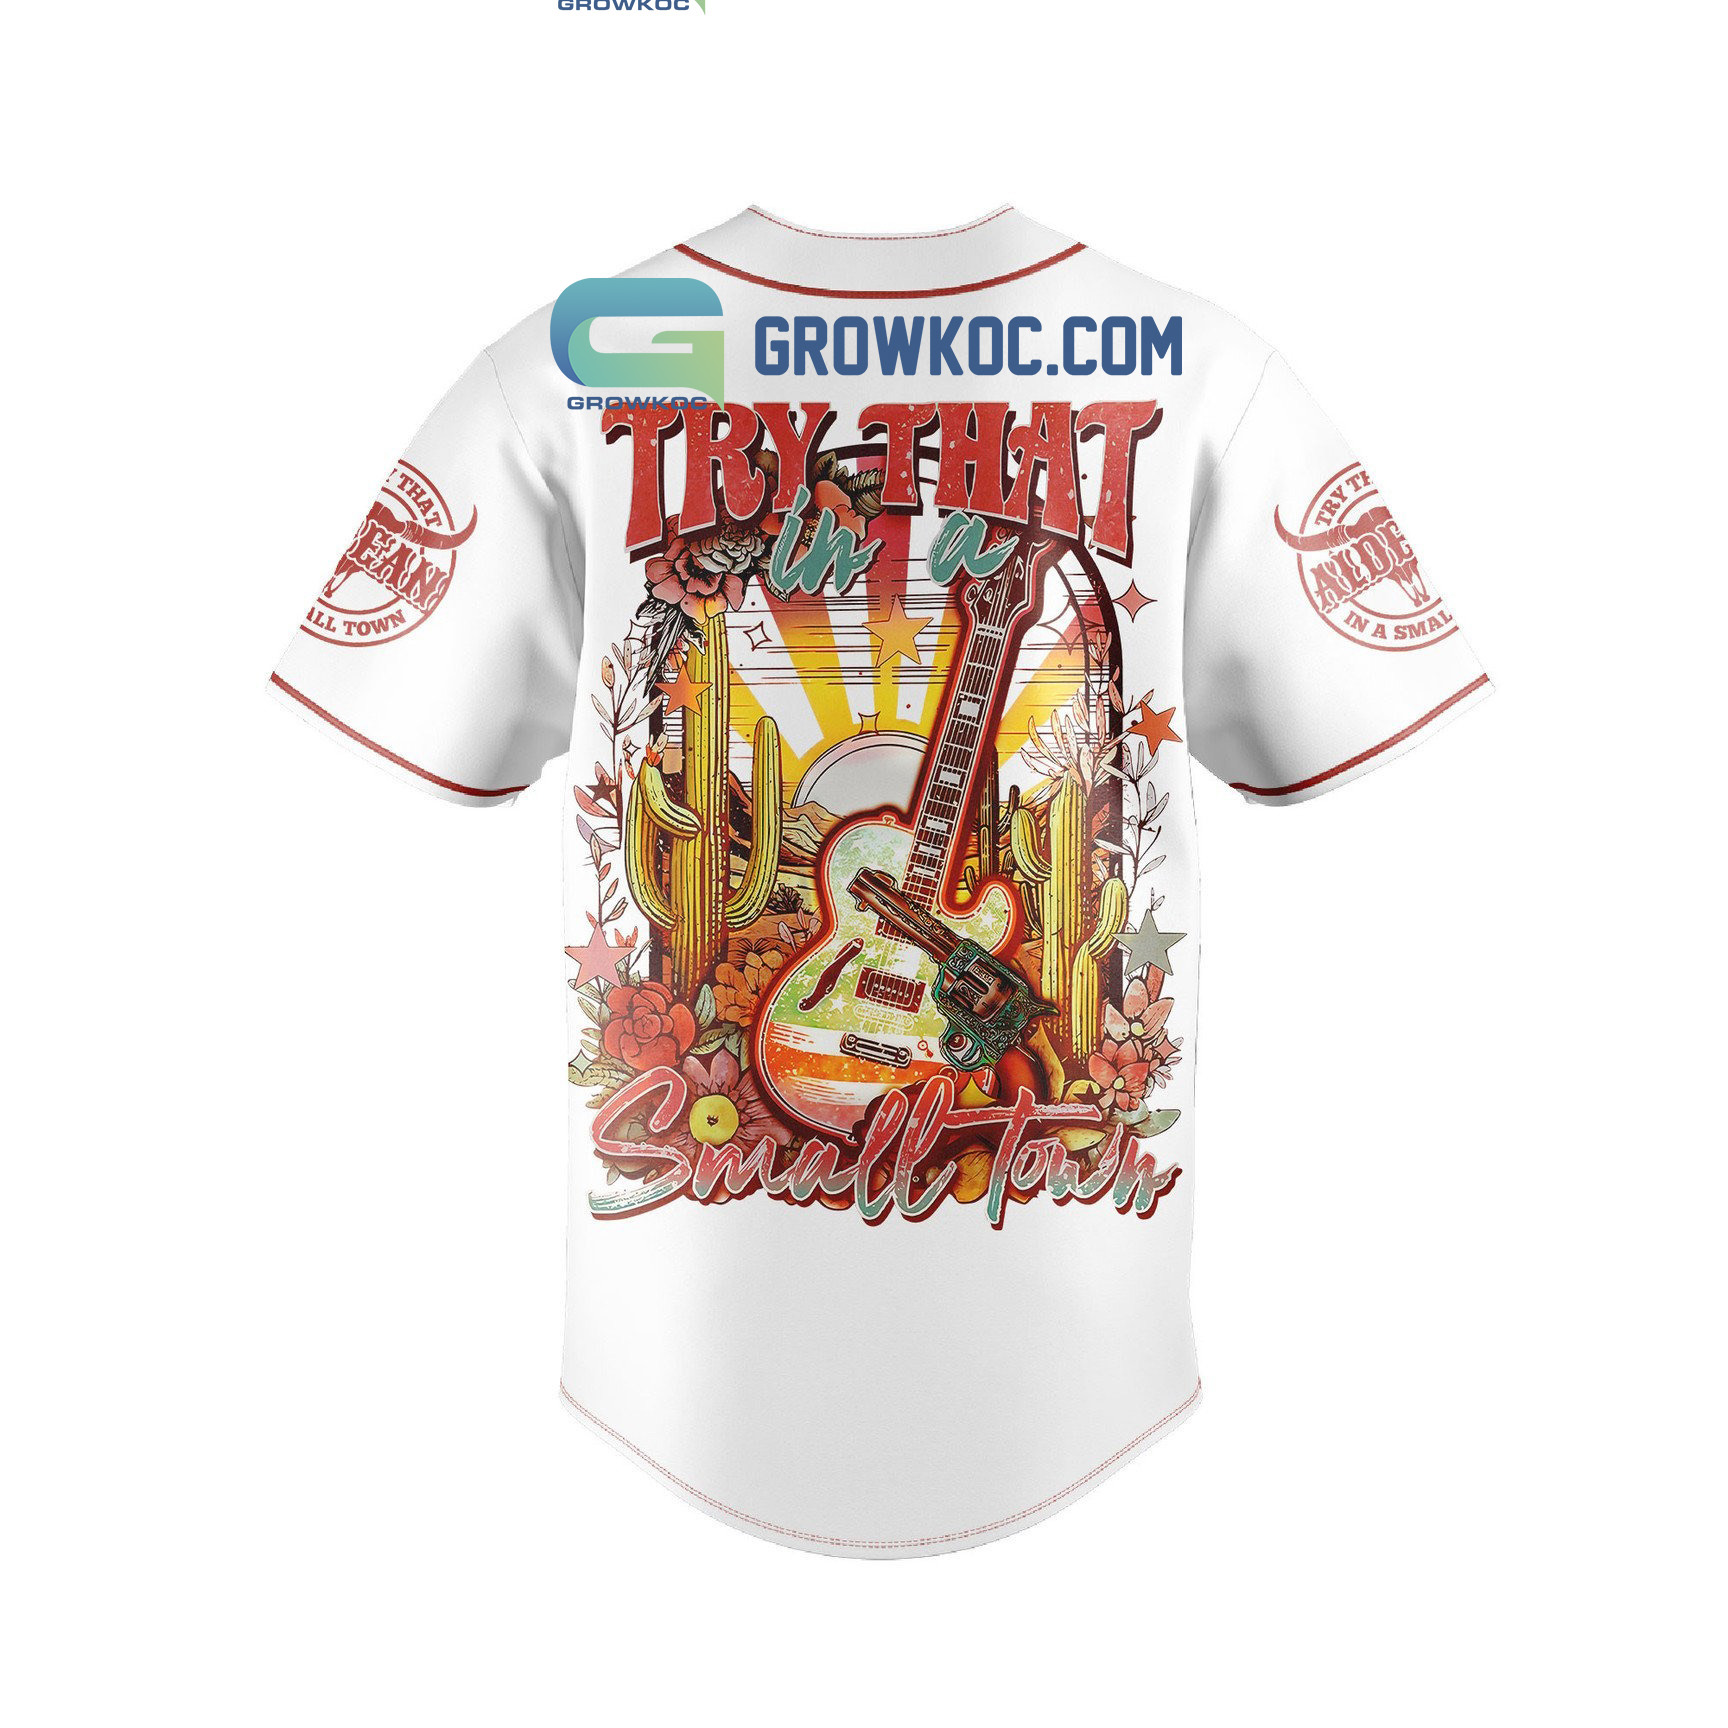 Try That In A Small Town Jason Aldean White Design Baseball Jersey - Growkoc